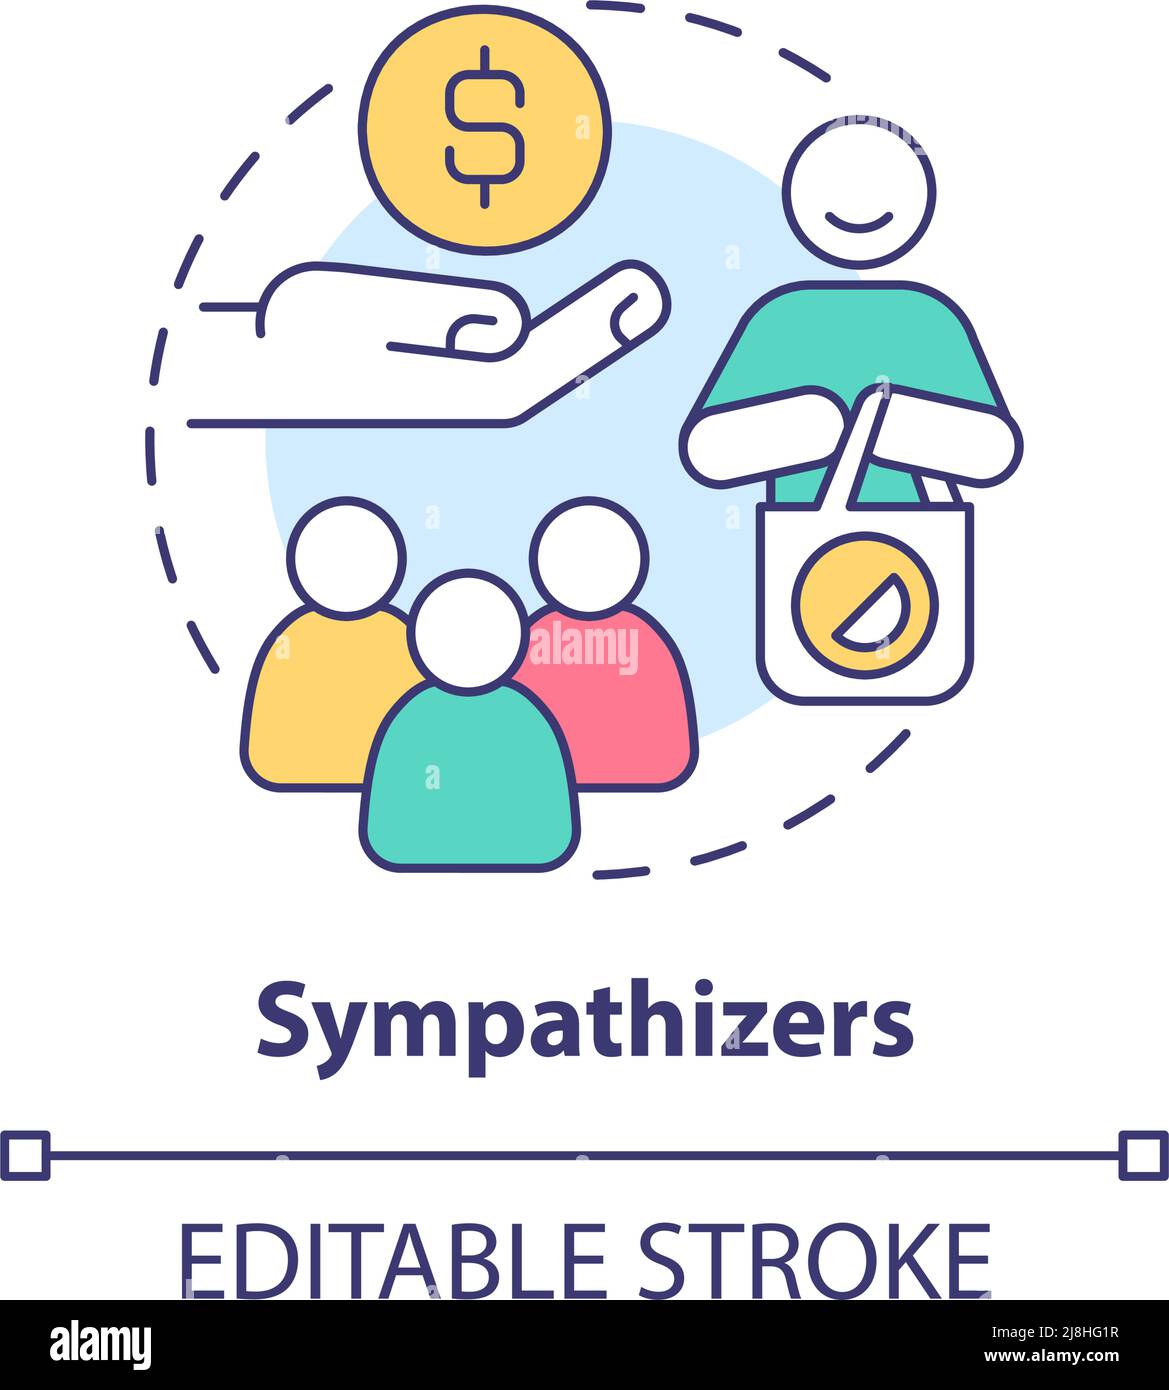 Sympathizers concept icon Stock Vector